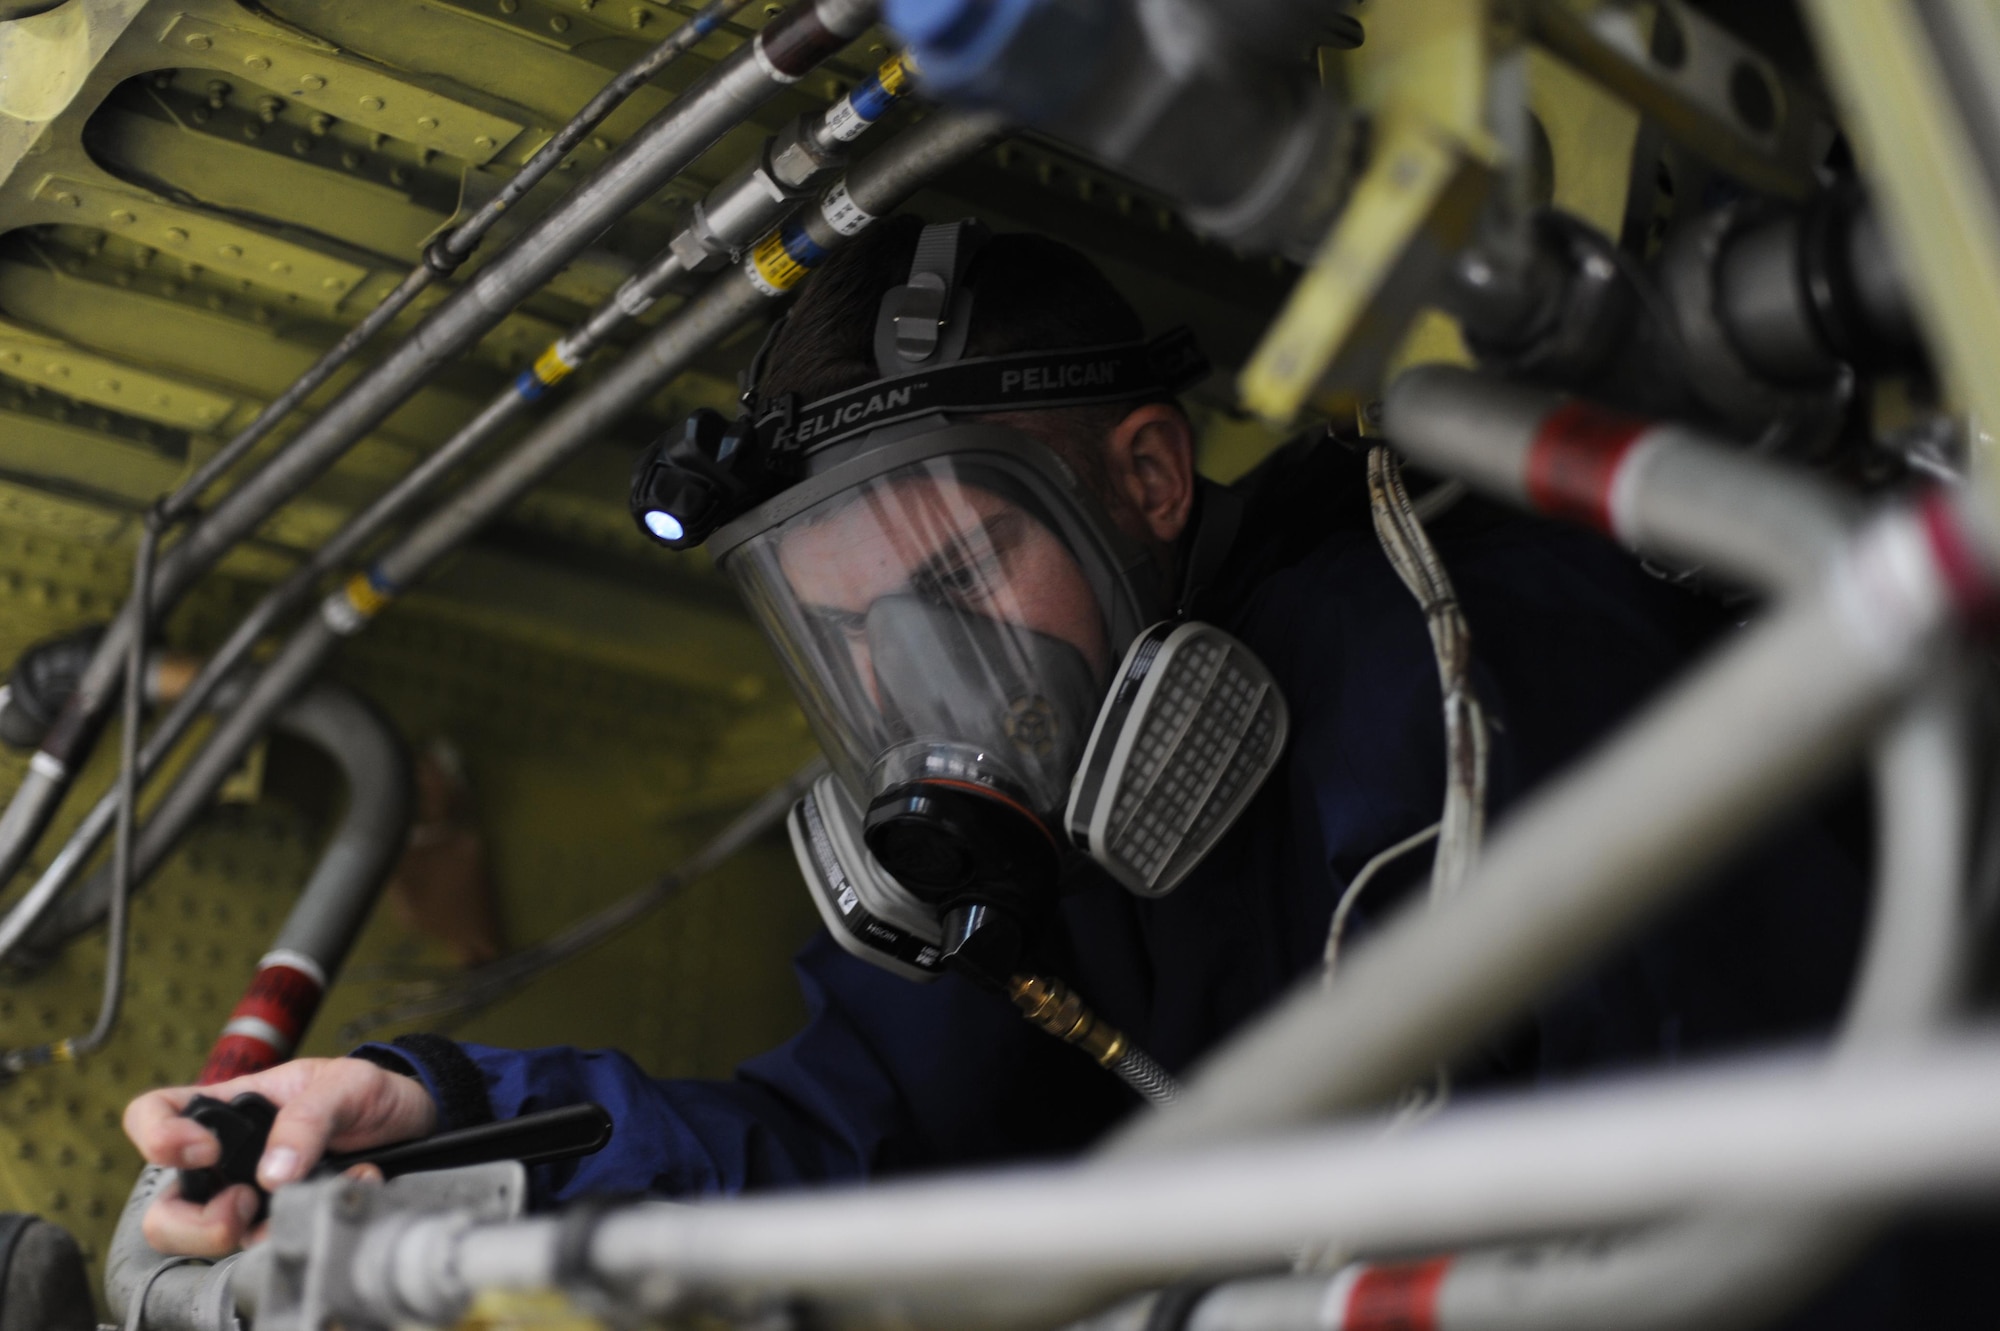 U.S. Air Force Senior Airman Timothy Thompson, 19th Maintenance Squadron Fuel Systems journeyman, uses a mock fuel tank to practice inspecting systems March 29, 2017, at Little Rock Air Force Base, Ark. When the team isn’t working on an aircraft, the focus is on training and honing their skills because fuel systems maintenance requires the highest attention to detail. (U.S. Air Force photo by Airman 1st Class Grace Nichols)